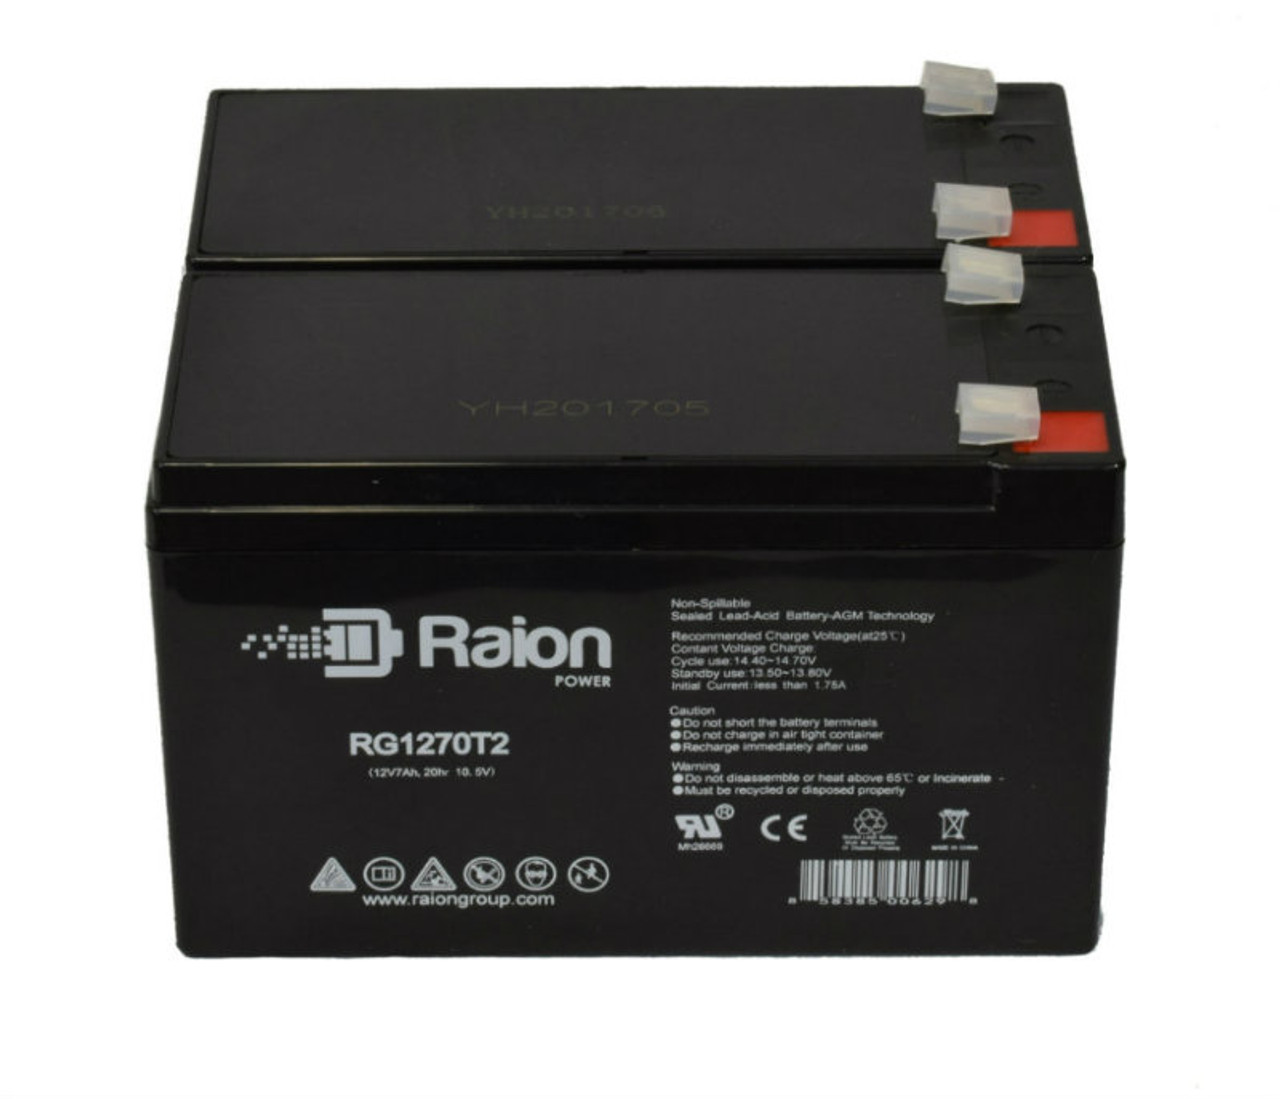 Raion Power Replacement 12V 7Ah Battery for Acorn 120 Perch Stairlift - 2 Pack